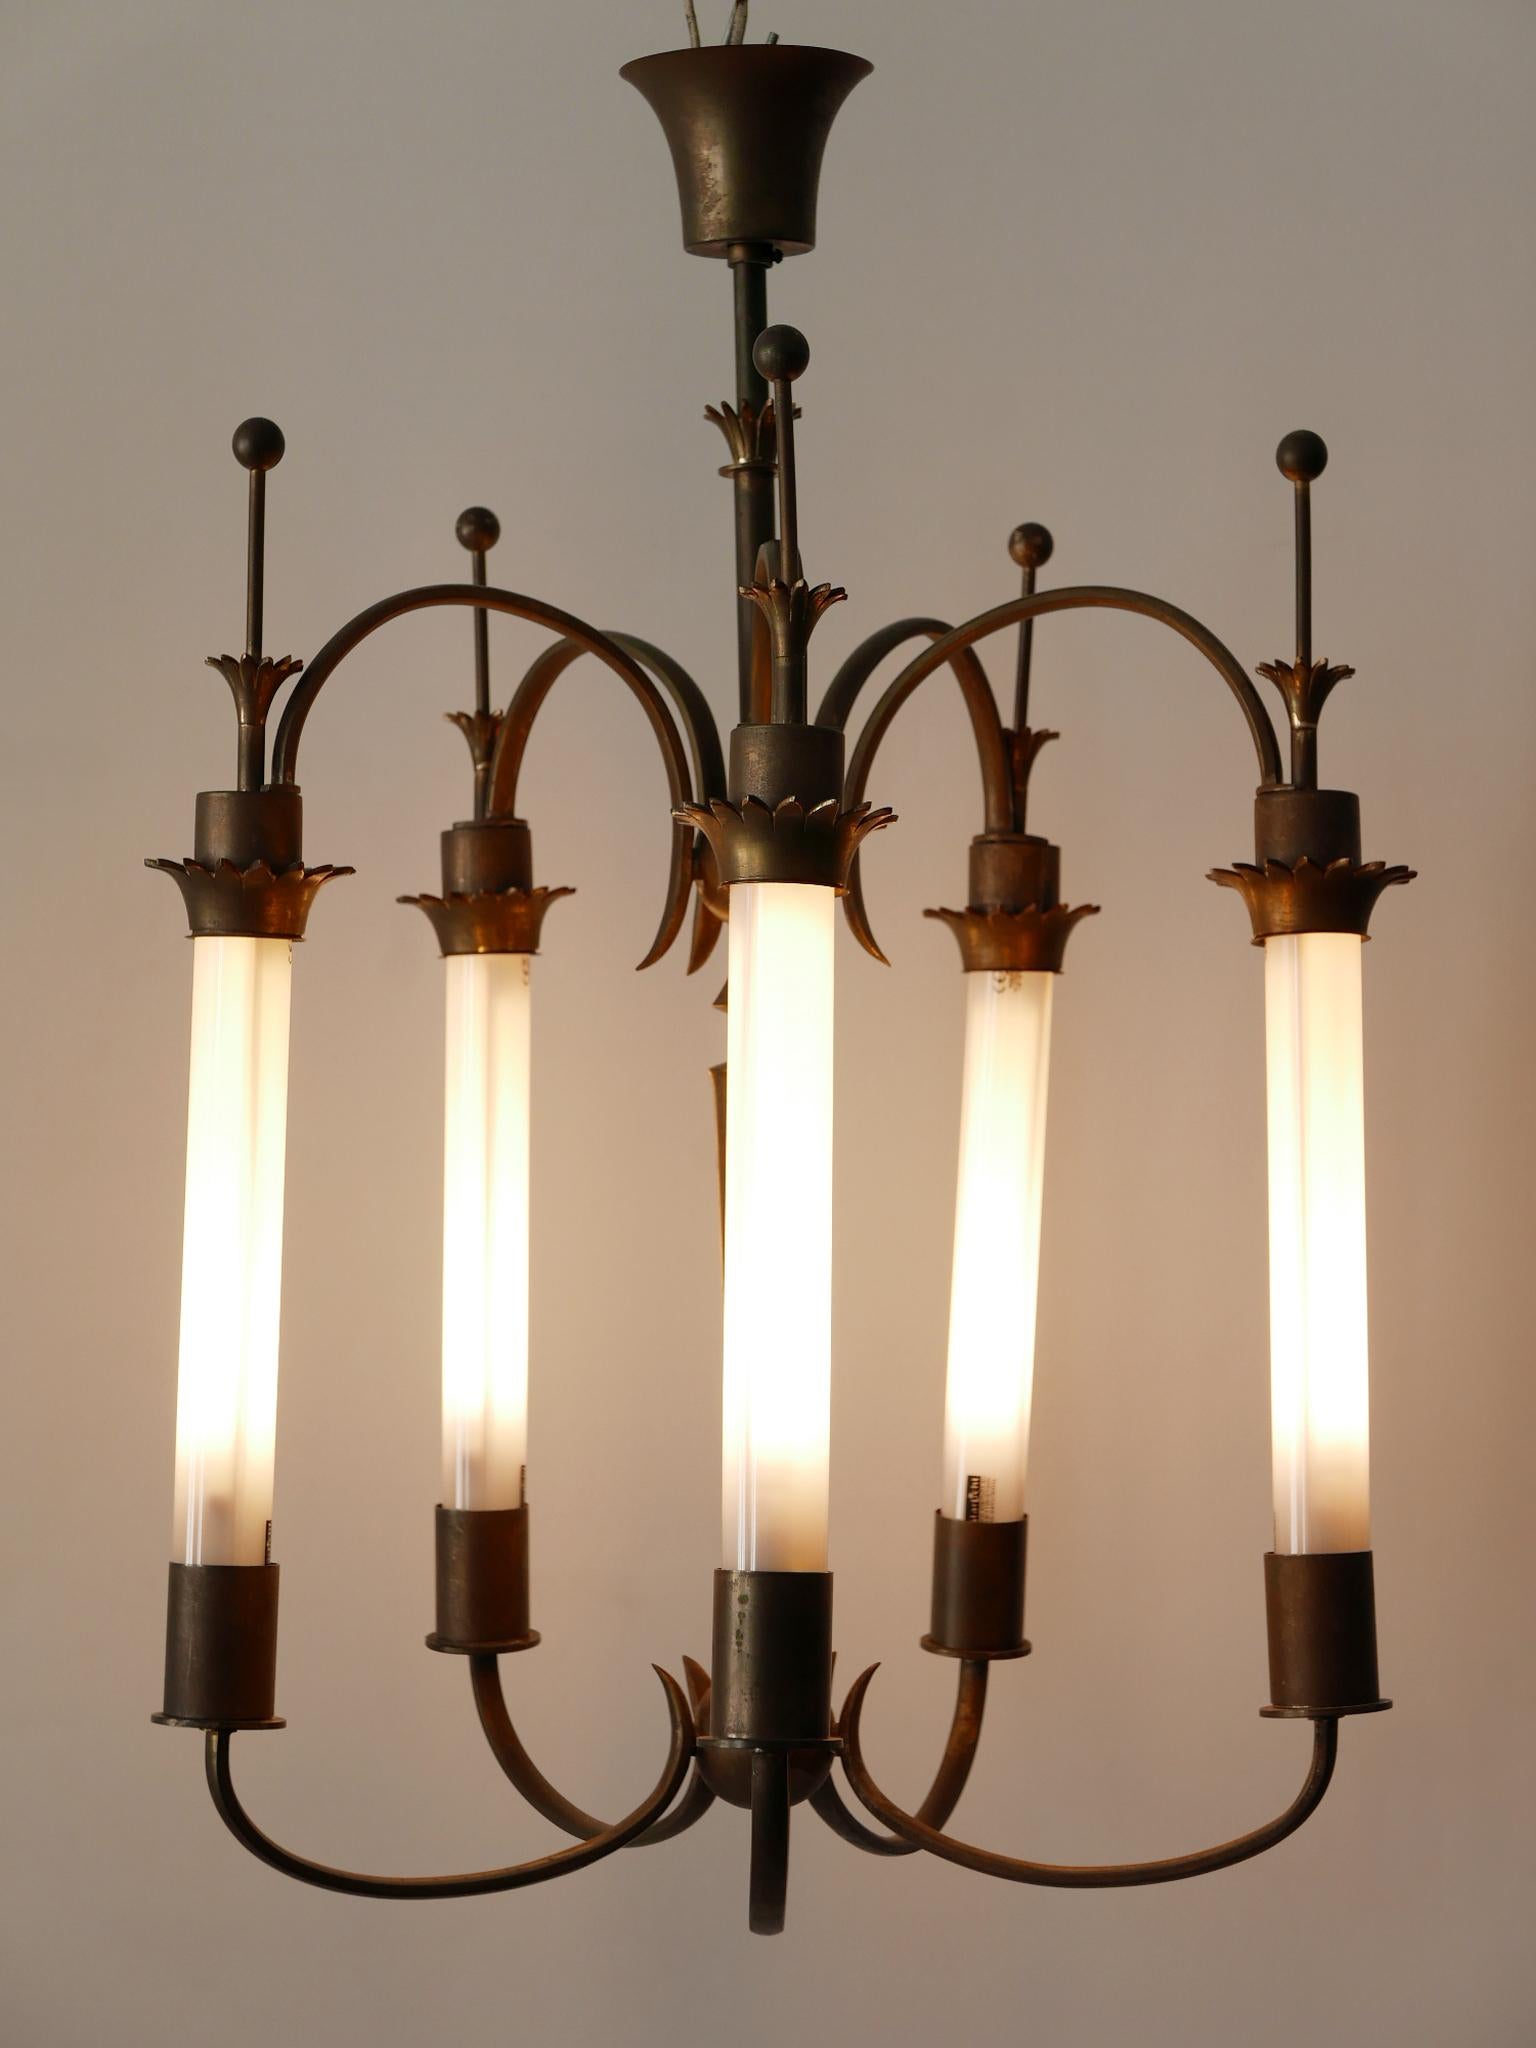 Exceptional and elegant Art Deco chandelier or ceiling lamp. Designed and manufactured probably in Germany, 1930s.

Executed in brass, the chandelier needs 5 x Soffitte S19 bulbs, is wired and in working condition. It runs both on 110/230 Volt.